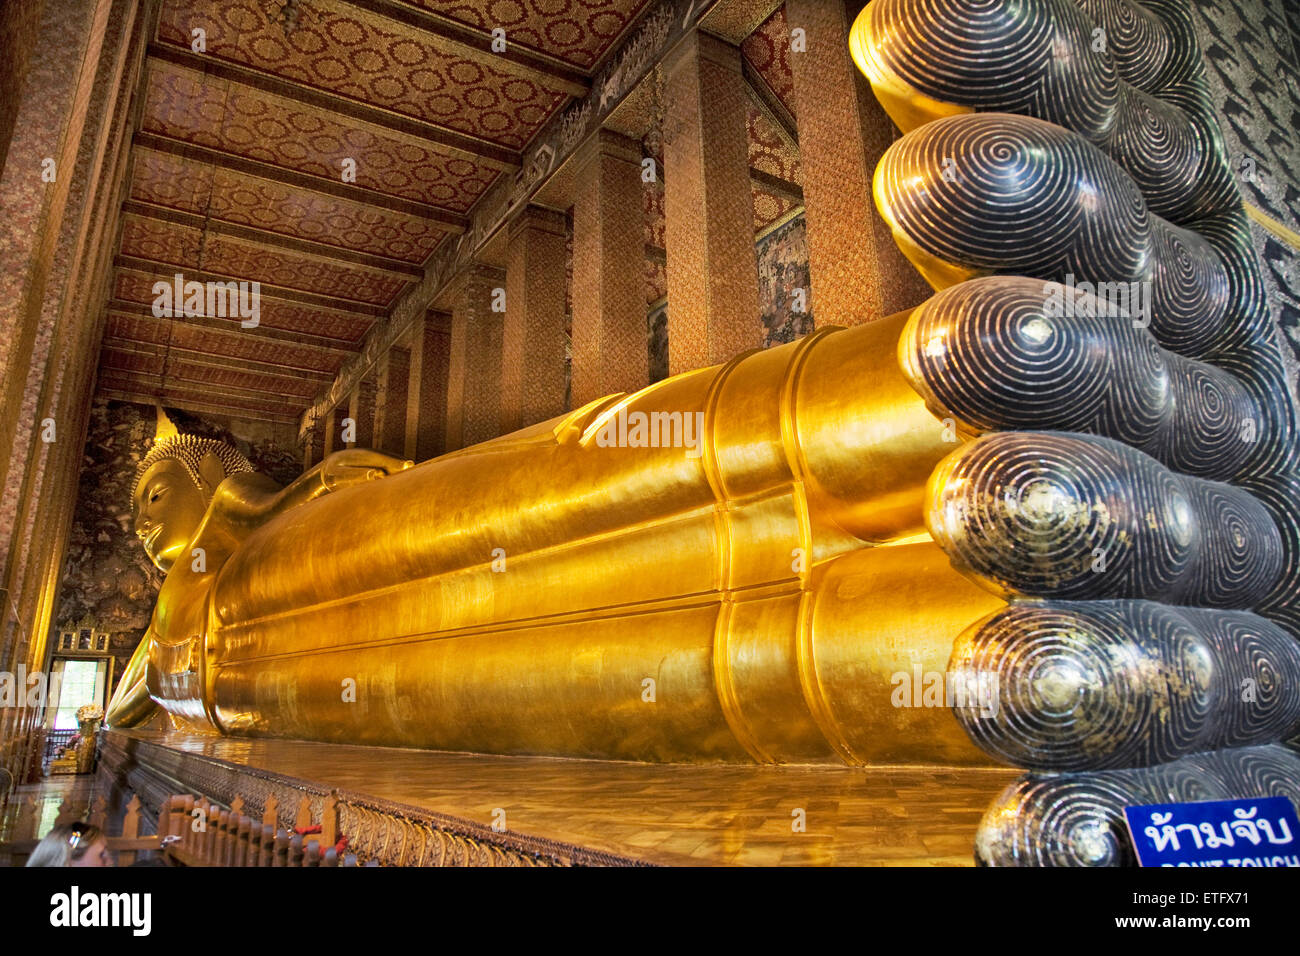 The reclining Buddha image at the temple of Wat Pho in Ko Rattanakosin in Bangkok is 45 metres long. Stock Photo